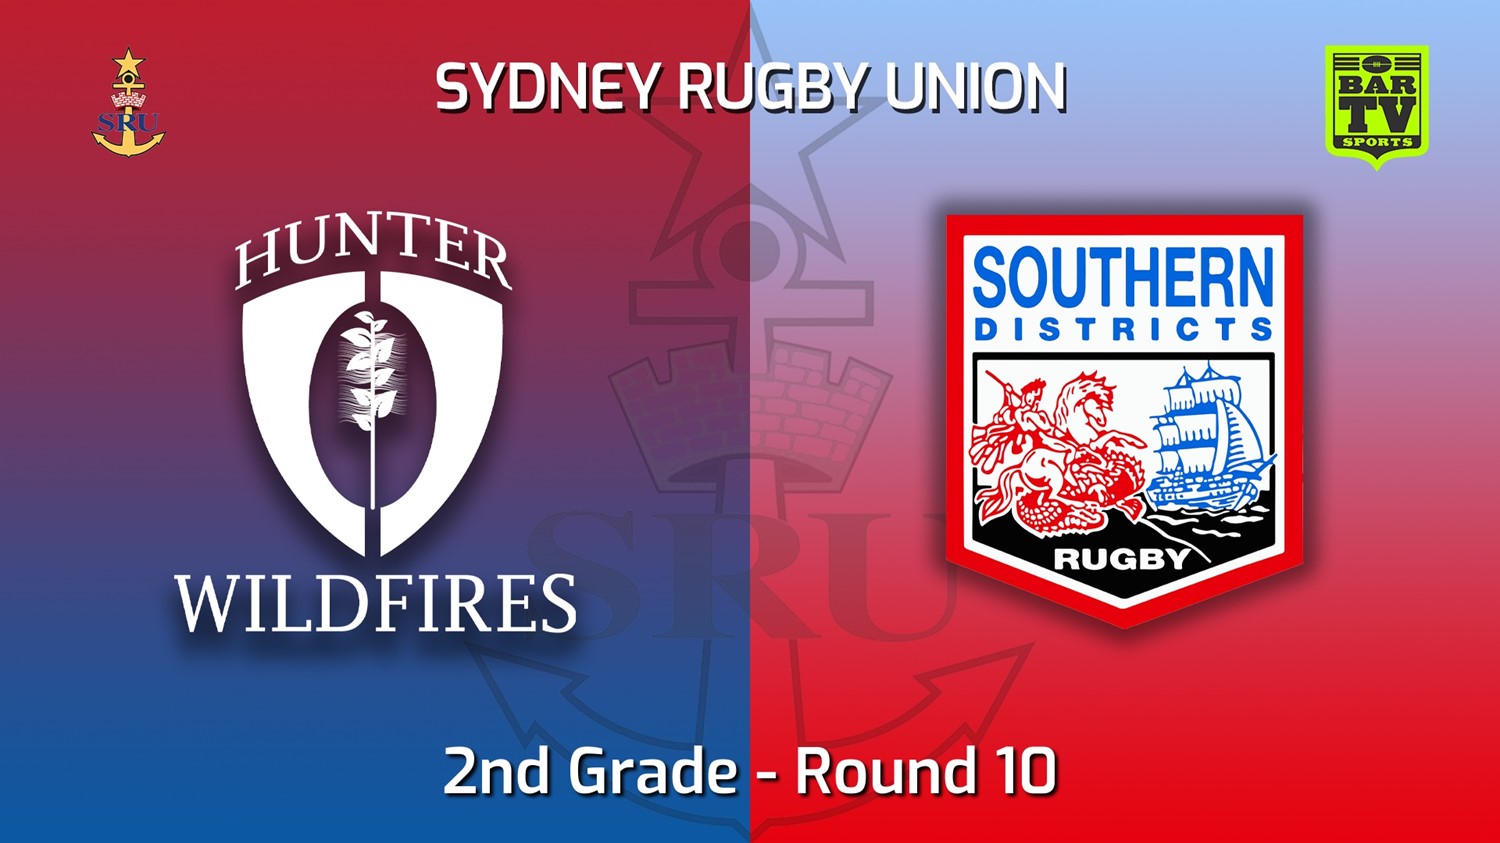 220604-Sydney Rugby Union Round 10  - 2nd Grade - Hunter Wildfires v Southern Districts Slate Image